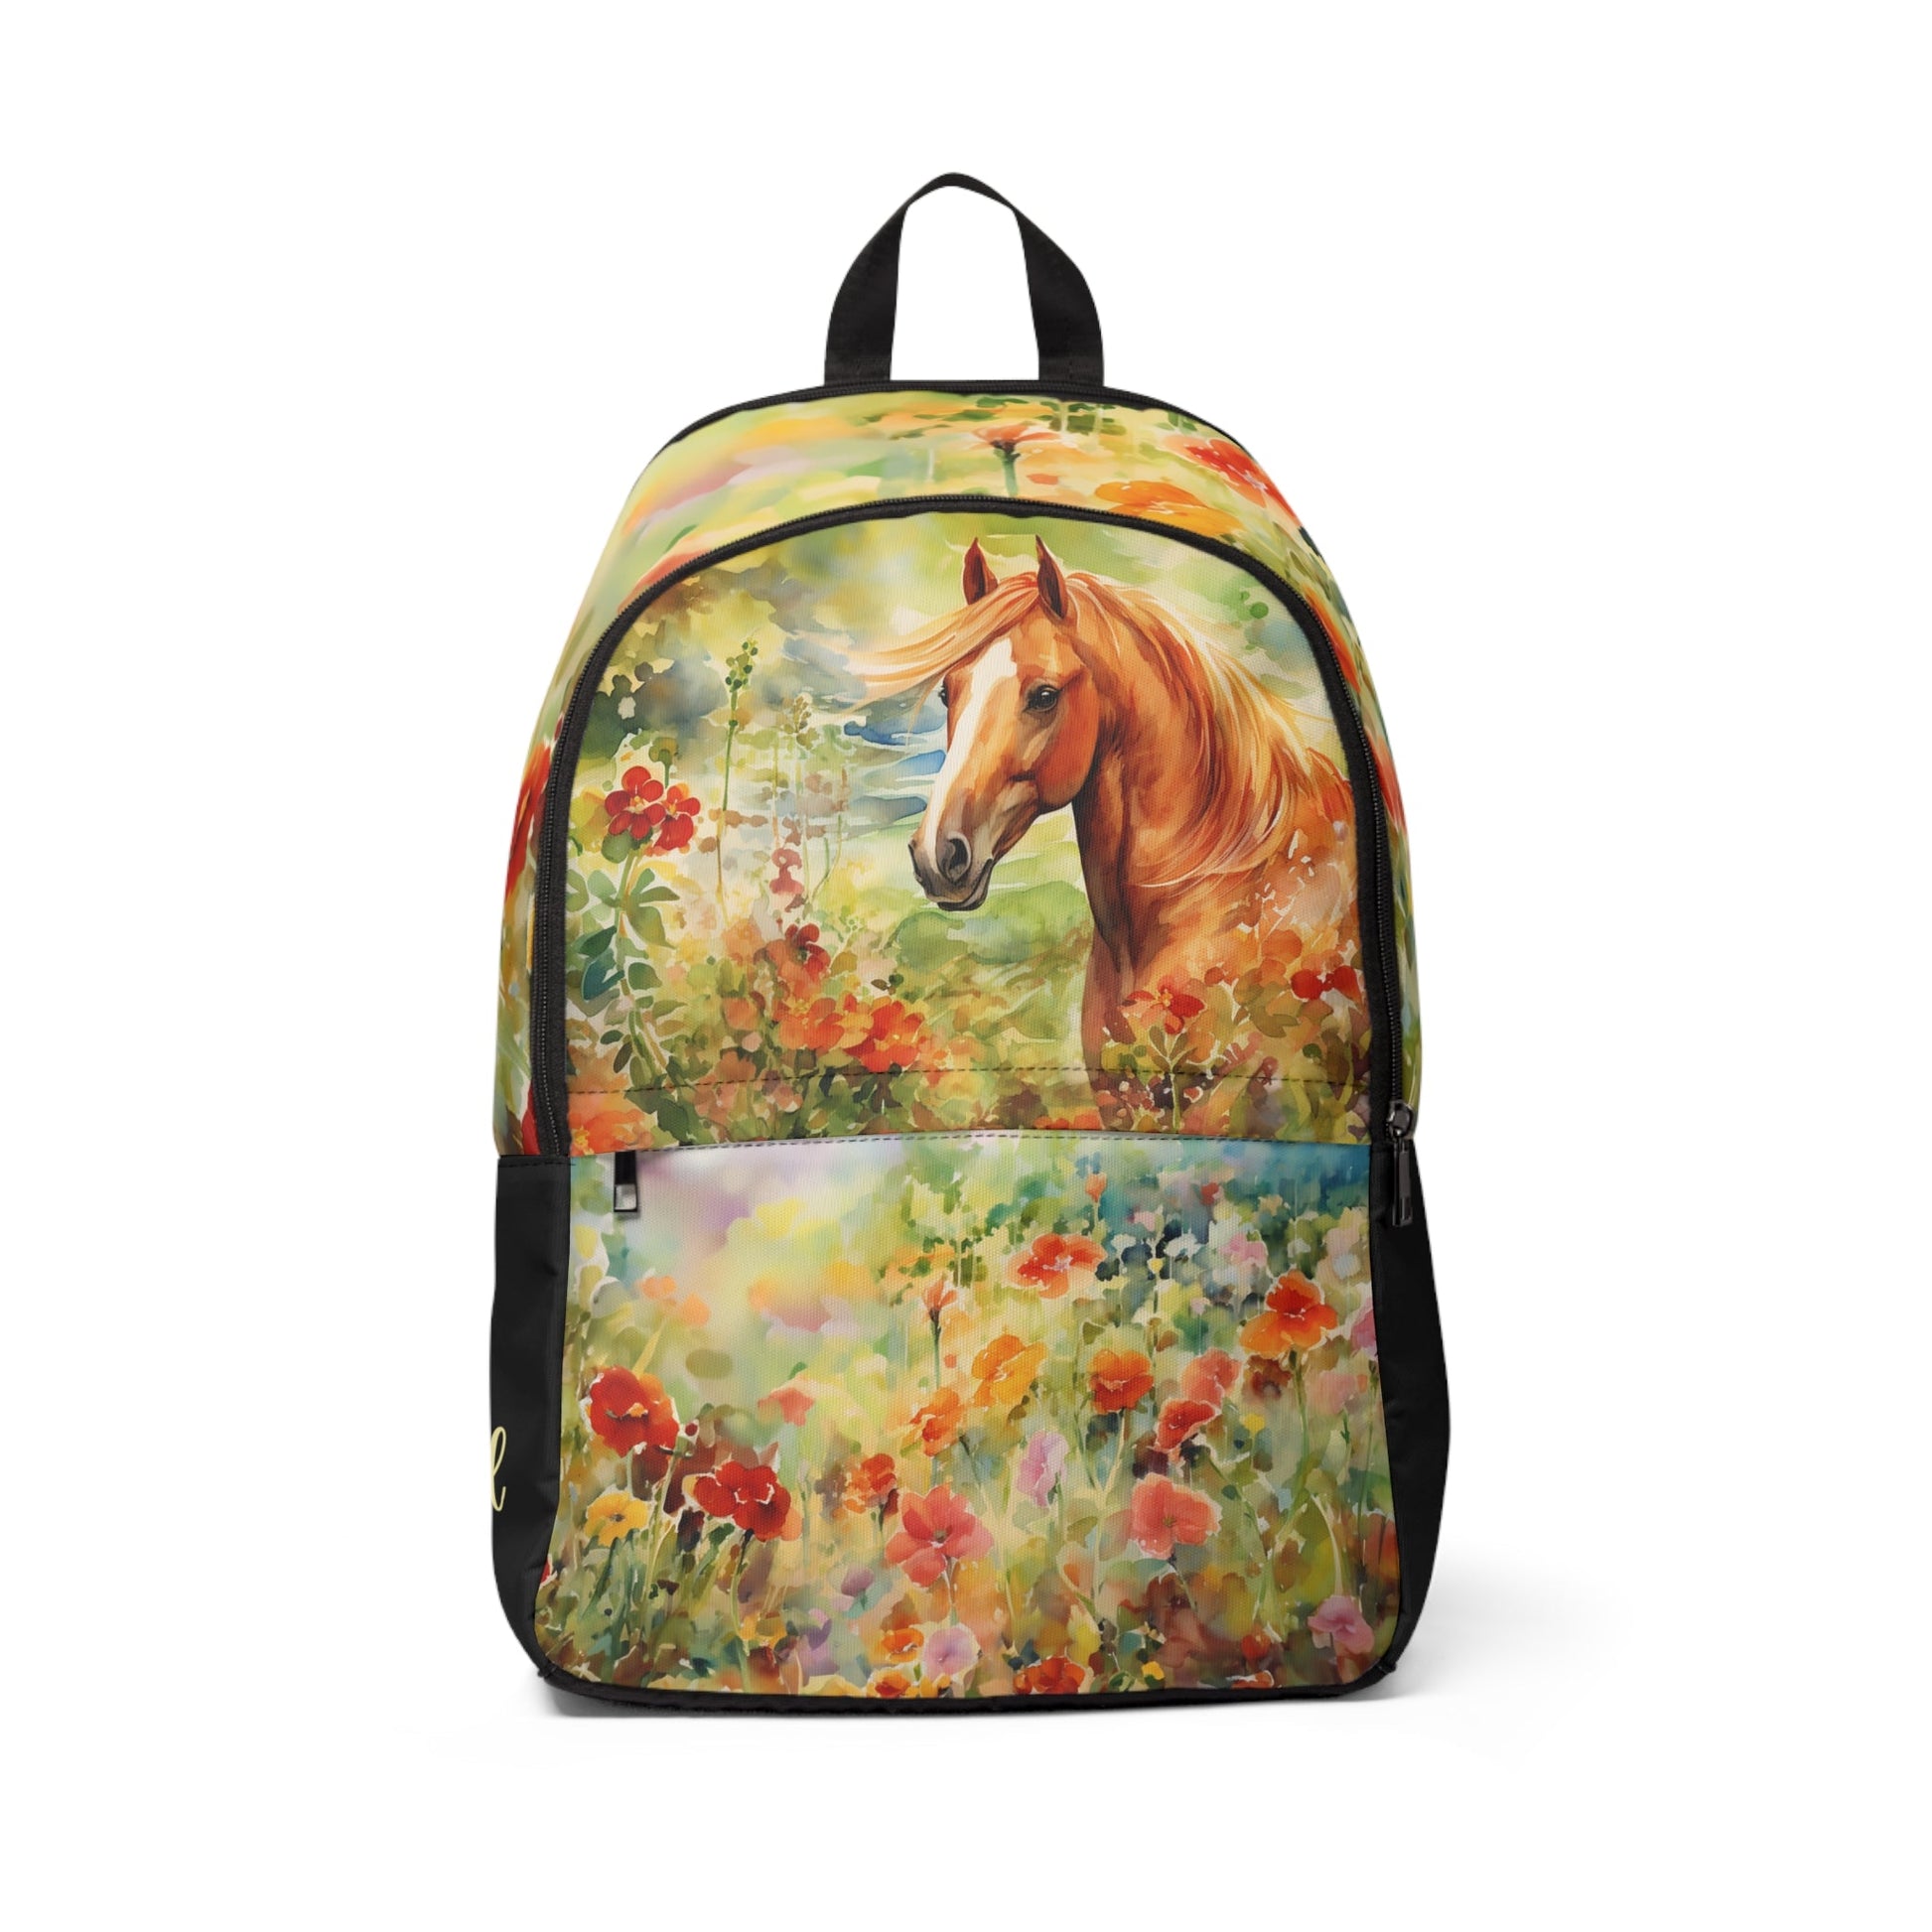 Fashionable Horse BackPack for Girls and Ladies, Perfect School or College Pack, Pony Sachel - FlooredByArt